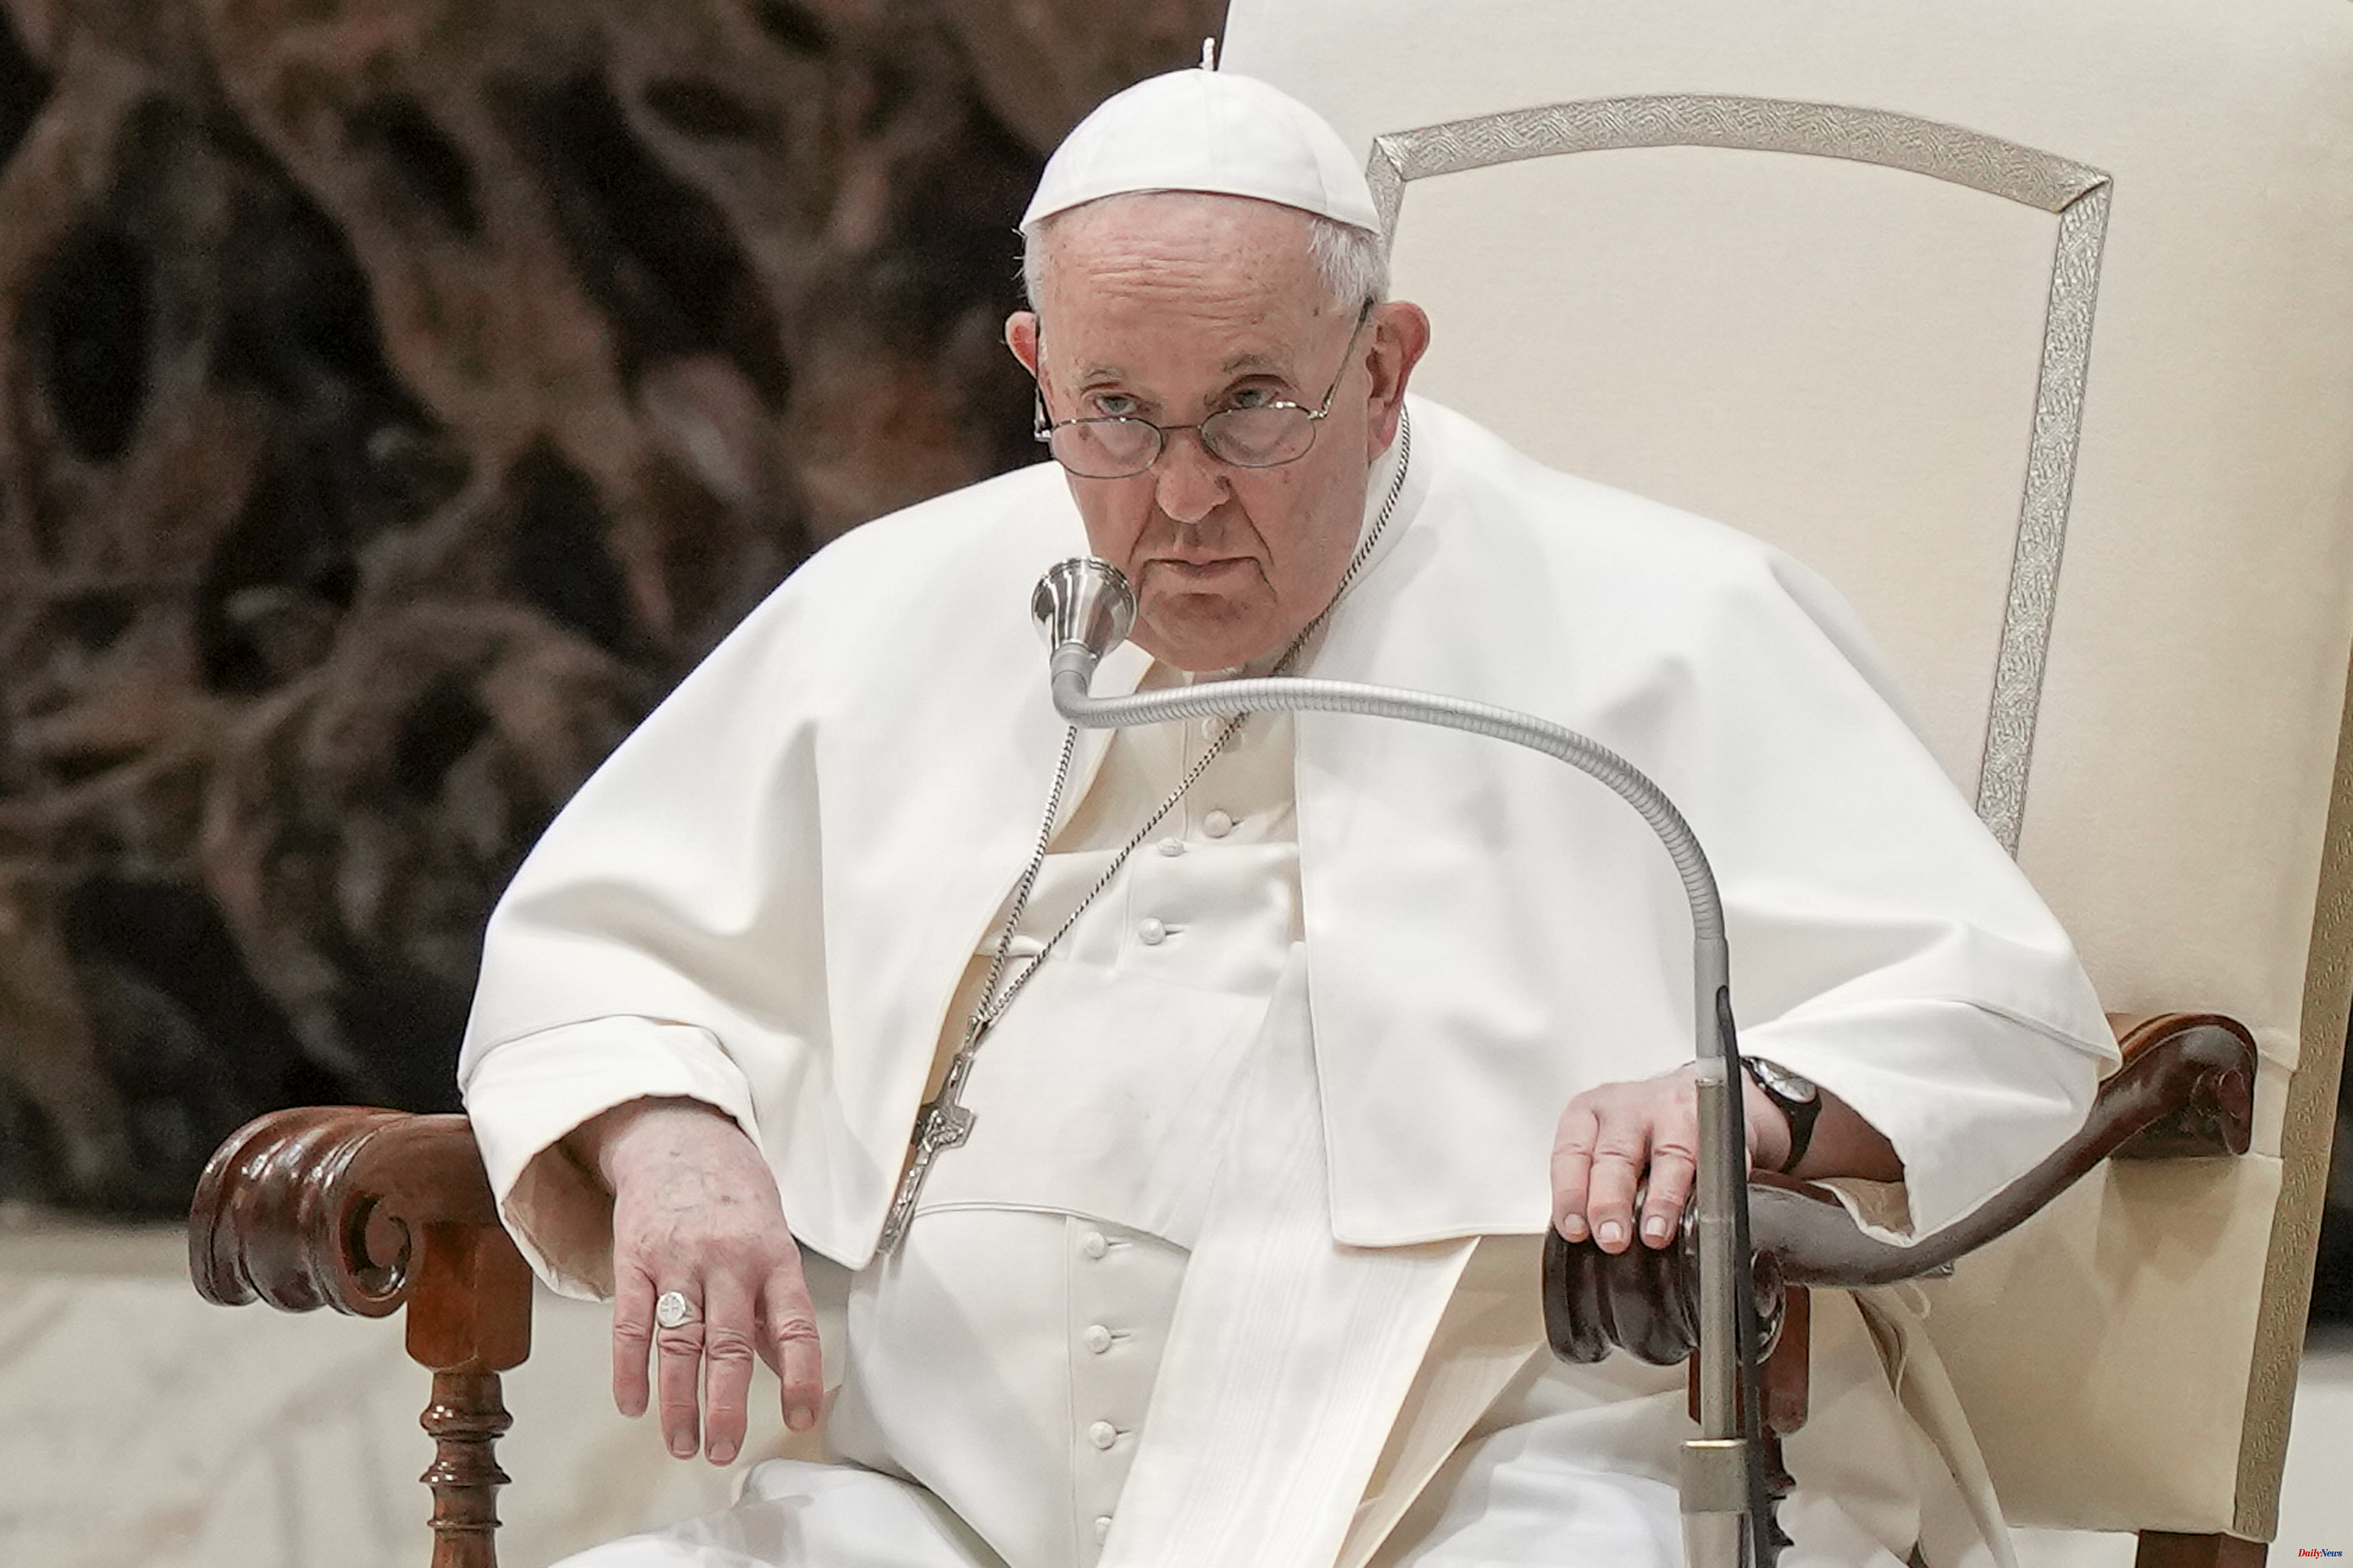 Vatican The situation of Pope Francis improves, but "now there is a risk of a shadow Conclave"